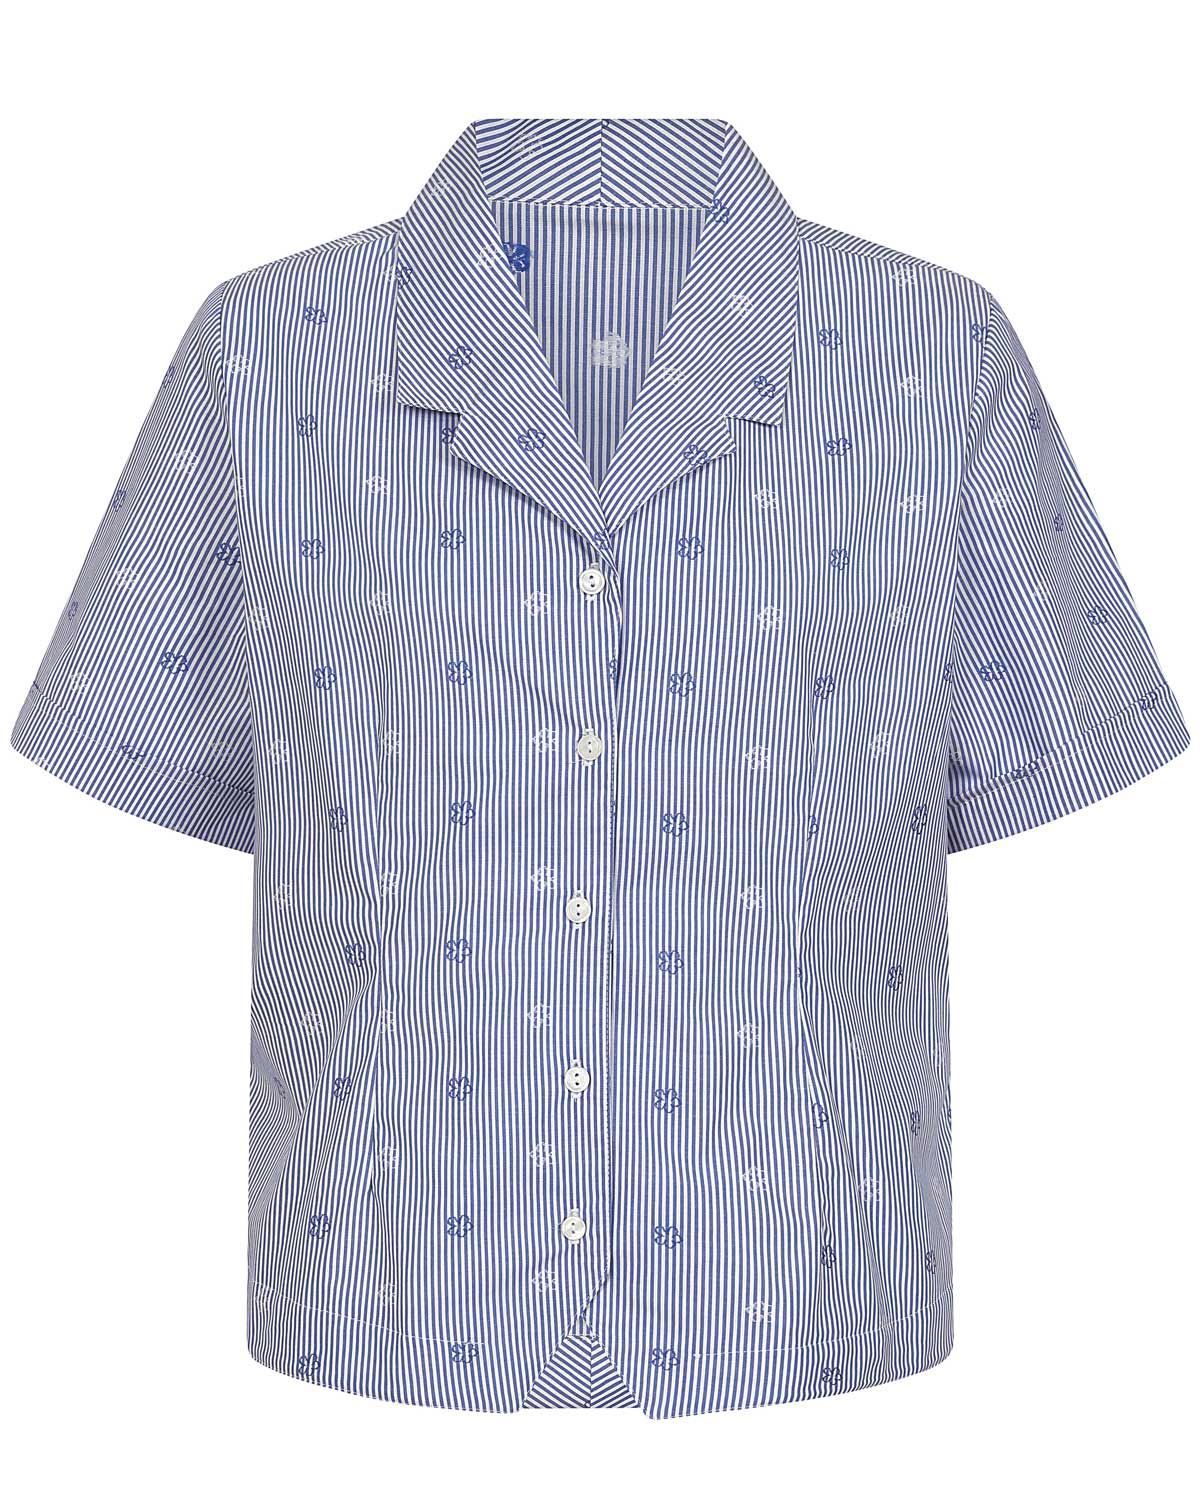 Ladies Agatha patterned pure cotton short sleeve blouse.